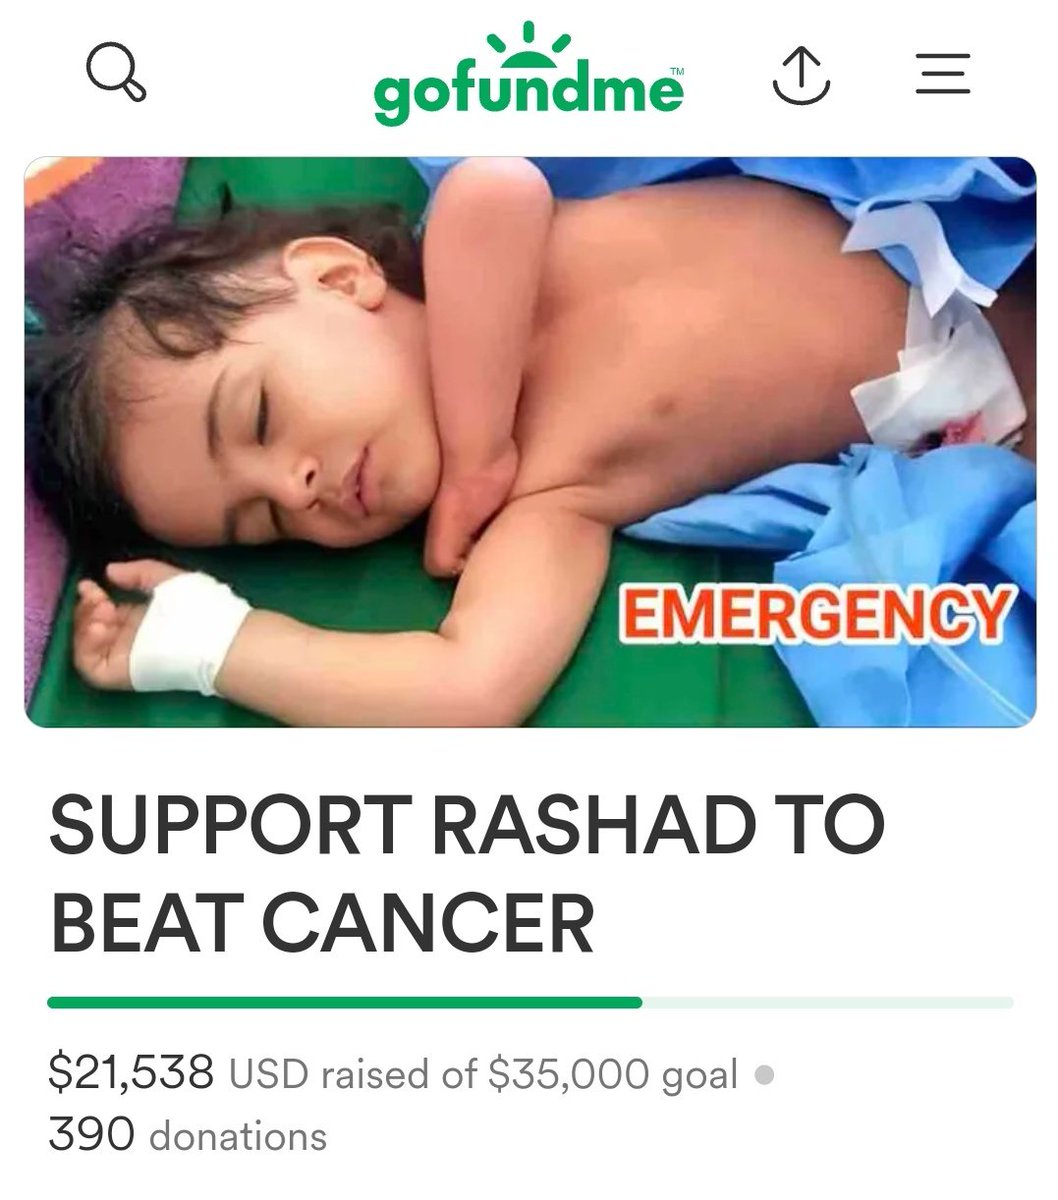 🔊BOOST CAN WE REACH the short-term goal of 25k by the end of April? Please spread the word far and wide and donate if you can afford it, even $5 it makes difference.Rashad's life matters,LET HIM KNOW THAT HE IS NOT ALONE! 👇🙏🏻😔 gofund.me/755c6dab gofund.me/755c6dab